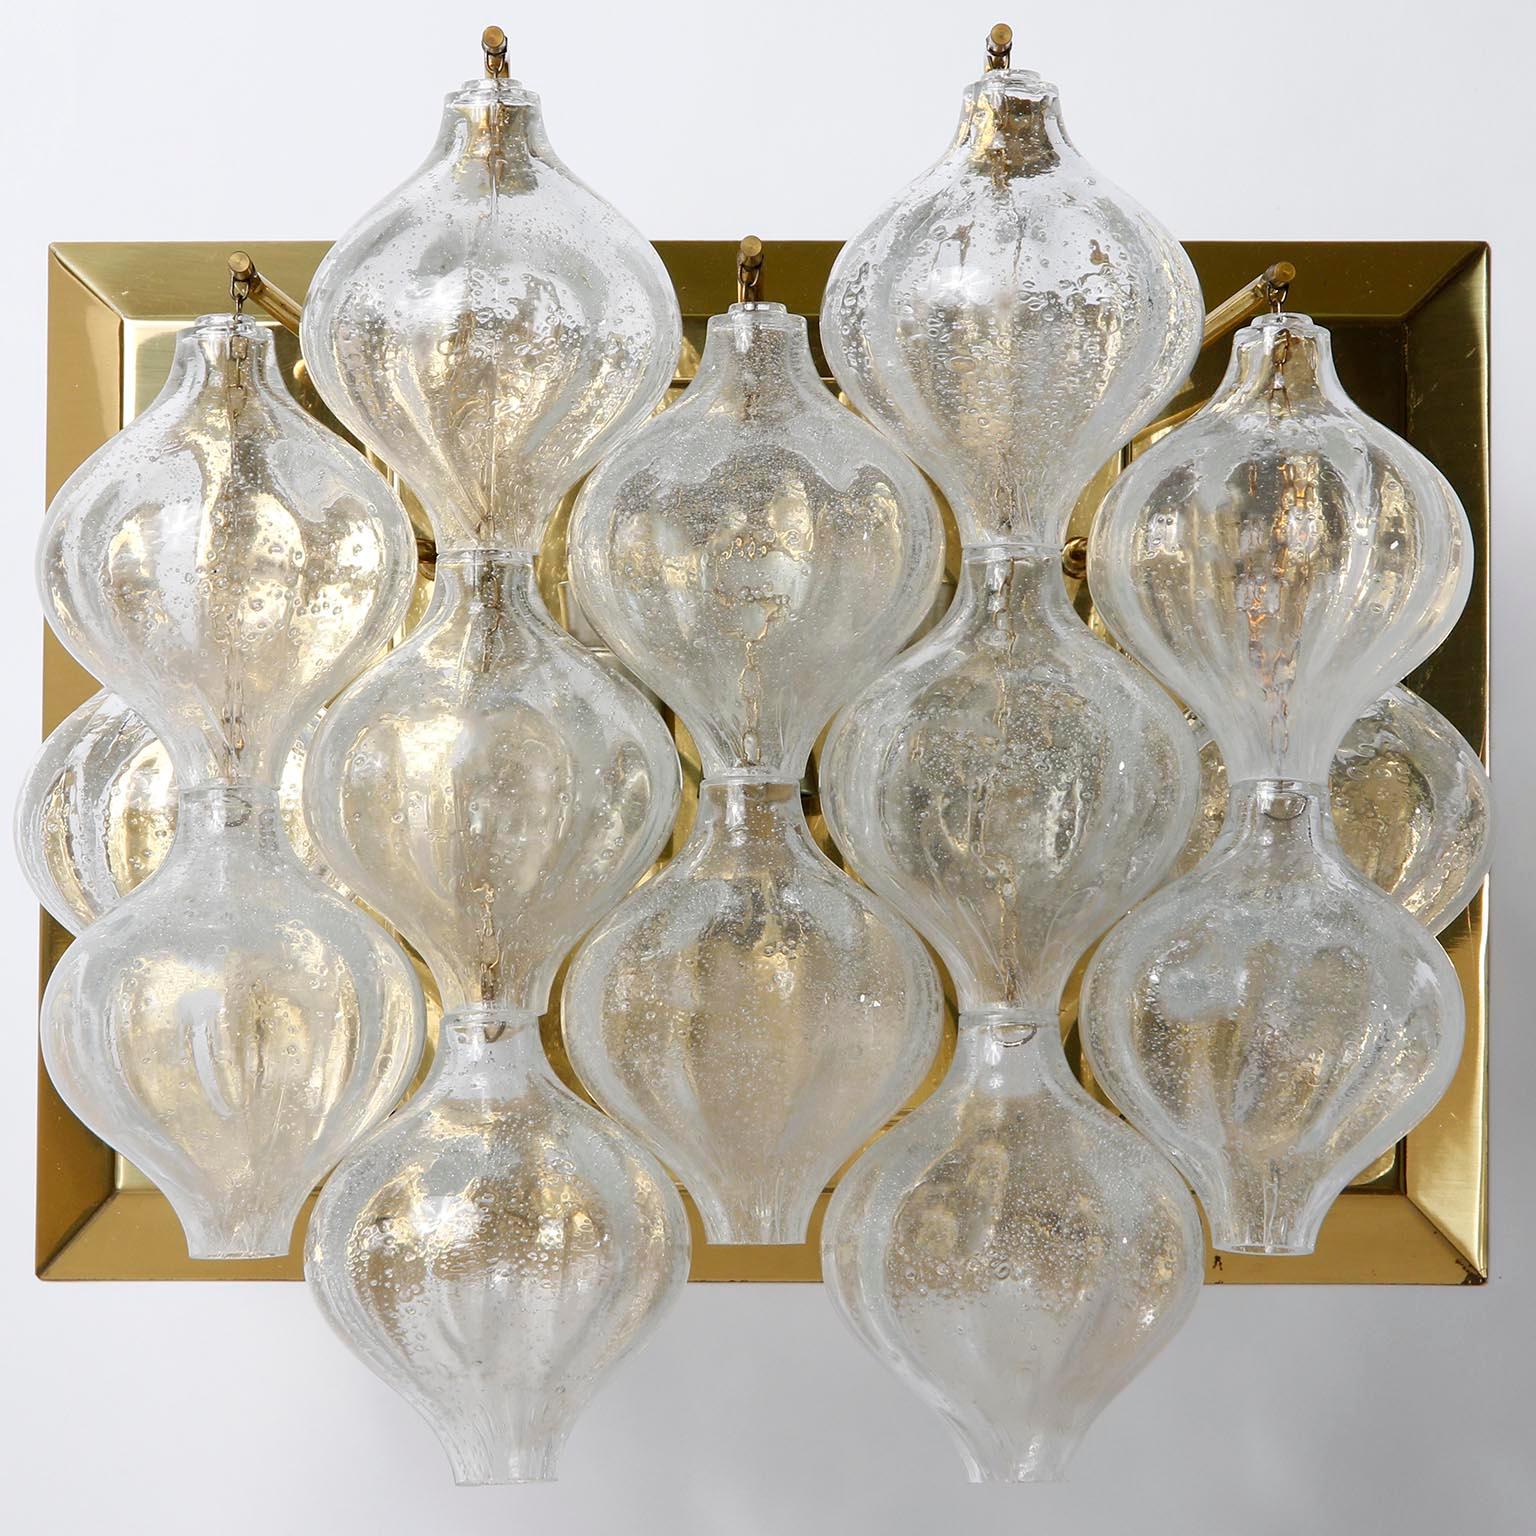 A pair of large 'Tulipan' brass and glass wall light fixtures by J.T. Kalmar, Austria, Vienna, manufactured in midcentury, circa 1970 (late 1960s or early 1970s).
Two pairs are available. The price is per pair.
The name Tulipan derives from the